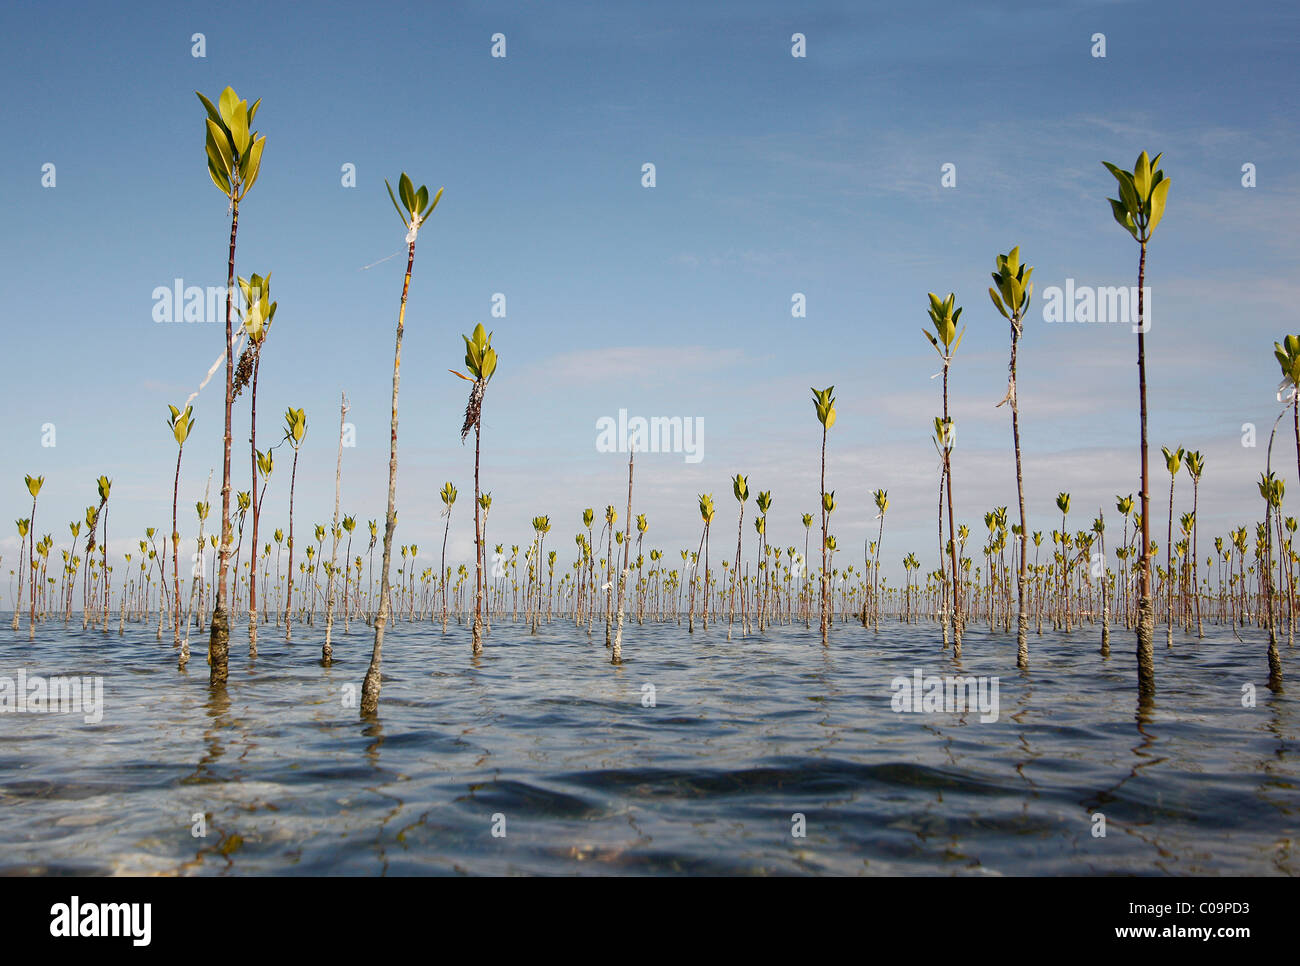 Mangrove reforestation, planting mangroves, mangrove forest one year old, Bohol, Visayas, Philippines, Southeast Asia, Asia Stock Photo